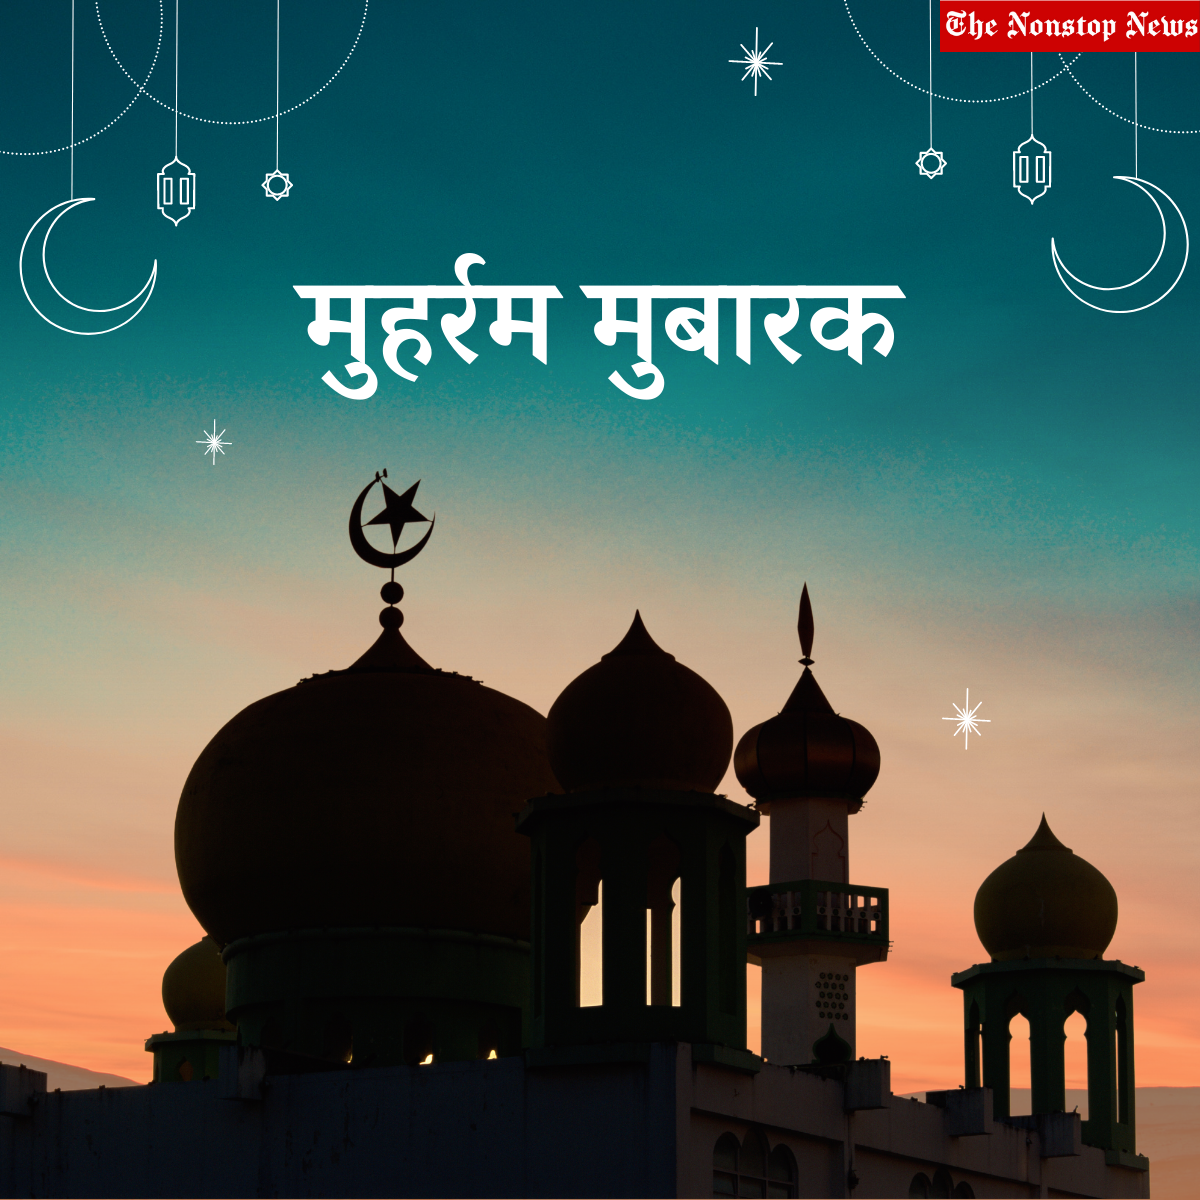 Muharram 2022: Hindi Greetings, Wishes, Images, Messages, Greetings, Quotes, Messages, Dua, and Shayari